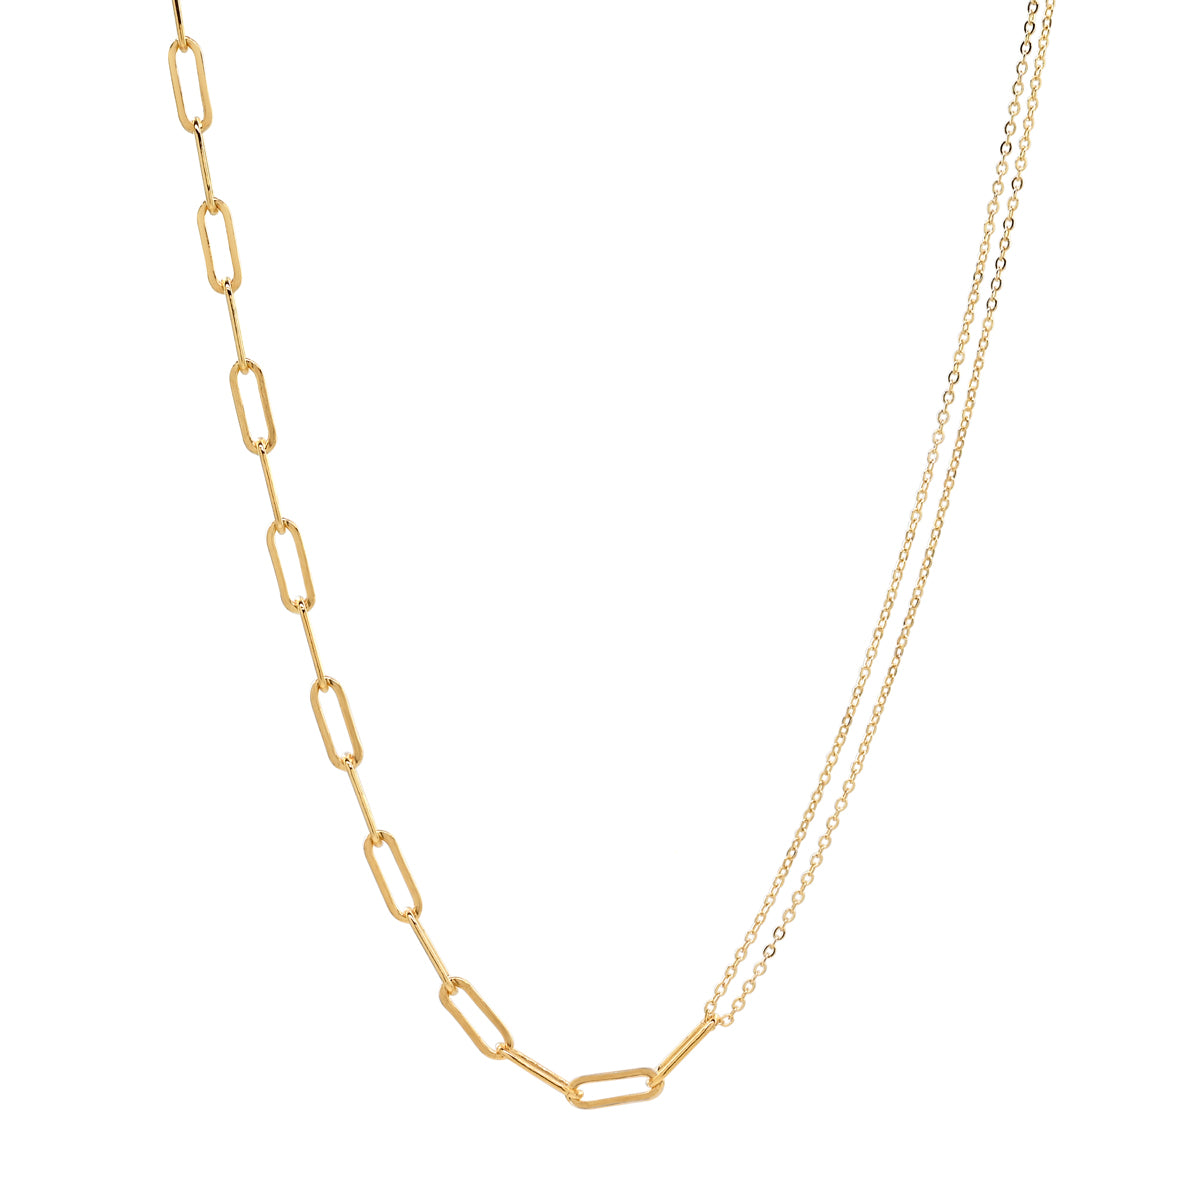 Buy Super Dainty Wrap Necklace // Simple and Delicate Thin Chain Necklaces  in Gold Filled or Sterling Silver // Valentine's Day Gift for Her Online in  India - Etsy